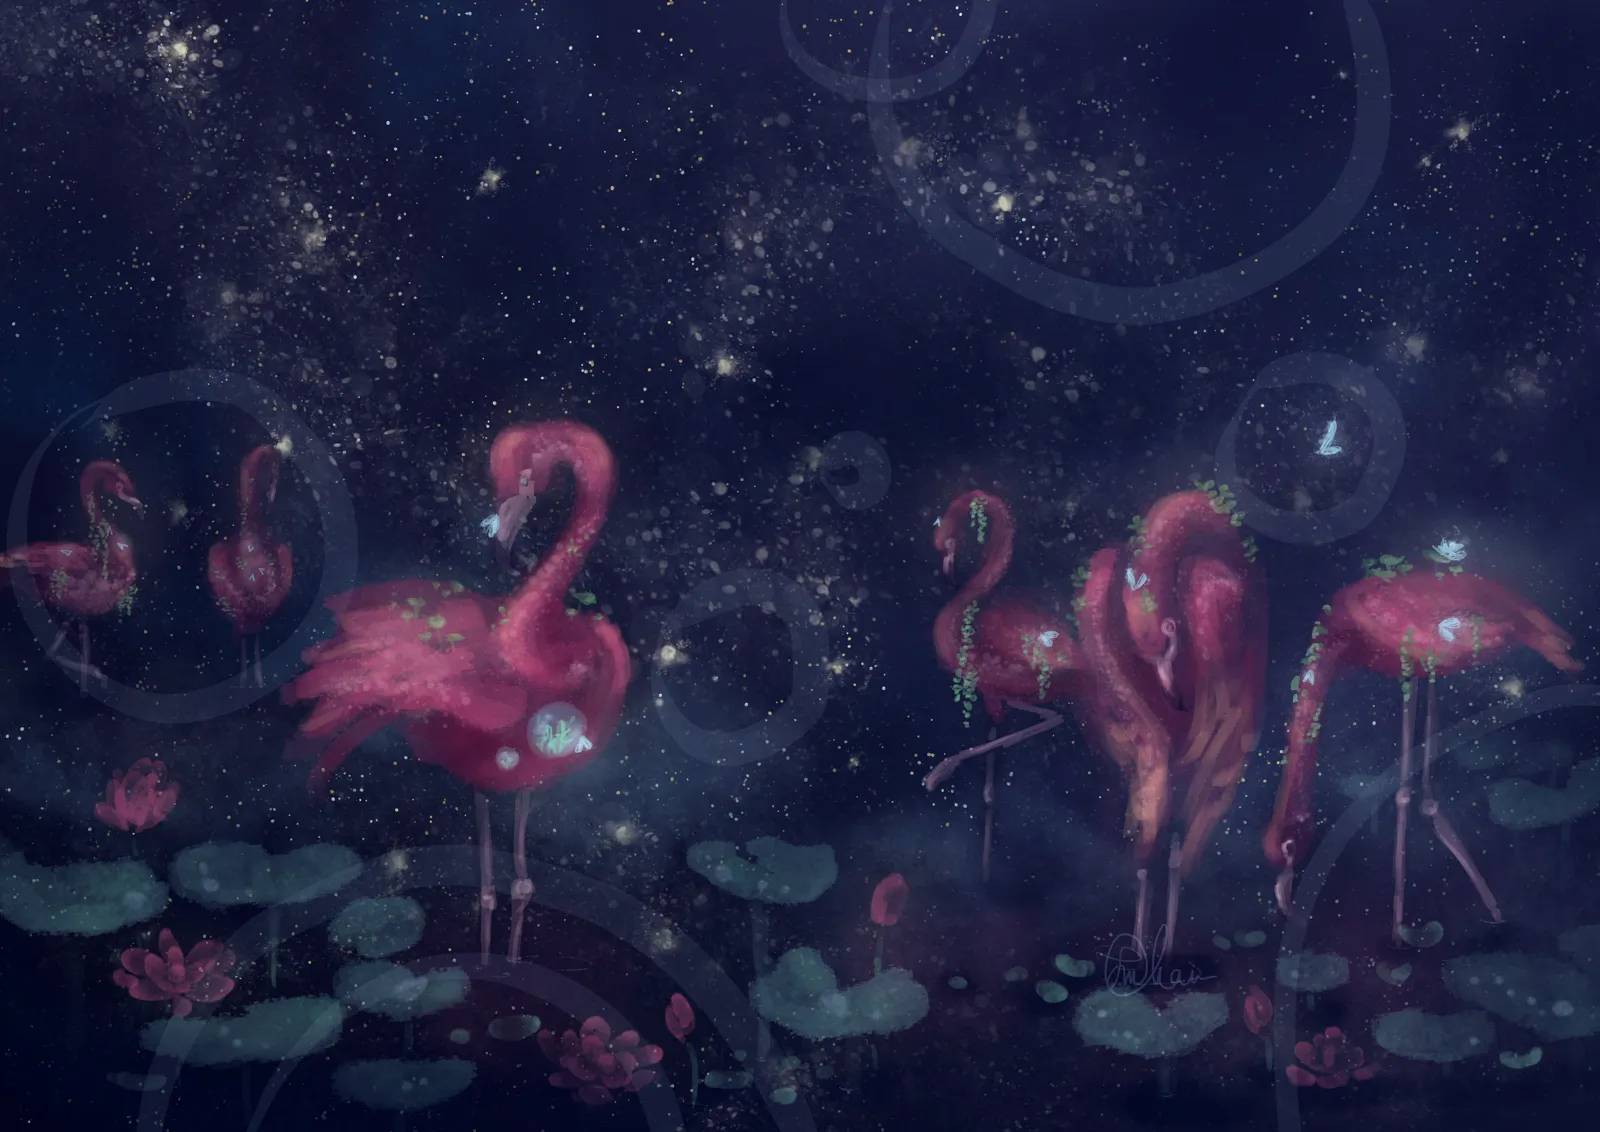 Blooming Flamingos by frostworkchan on DeviantArt